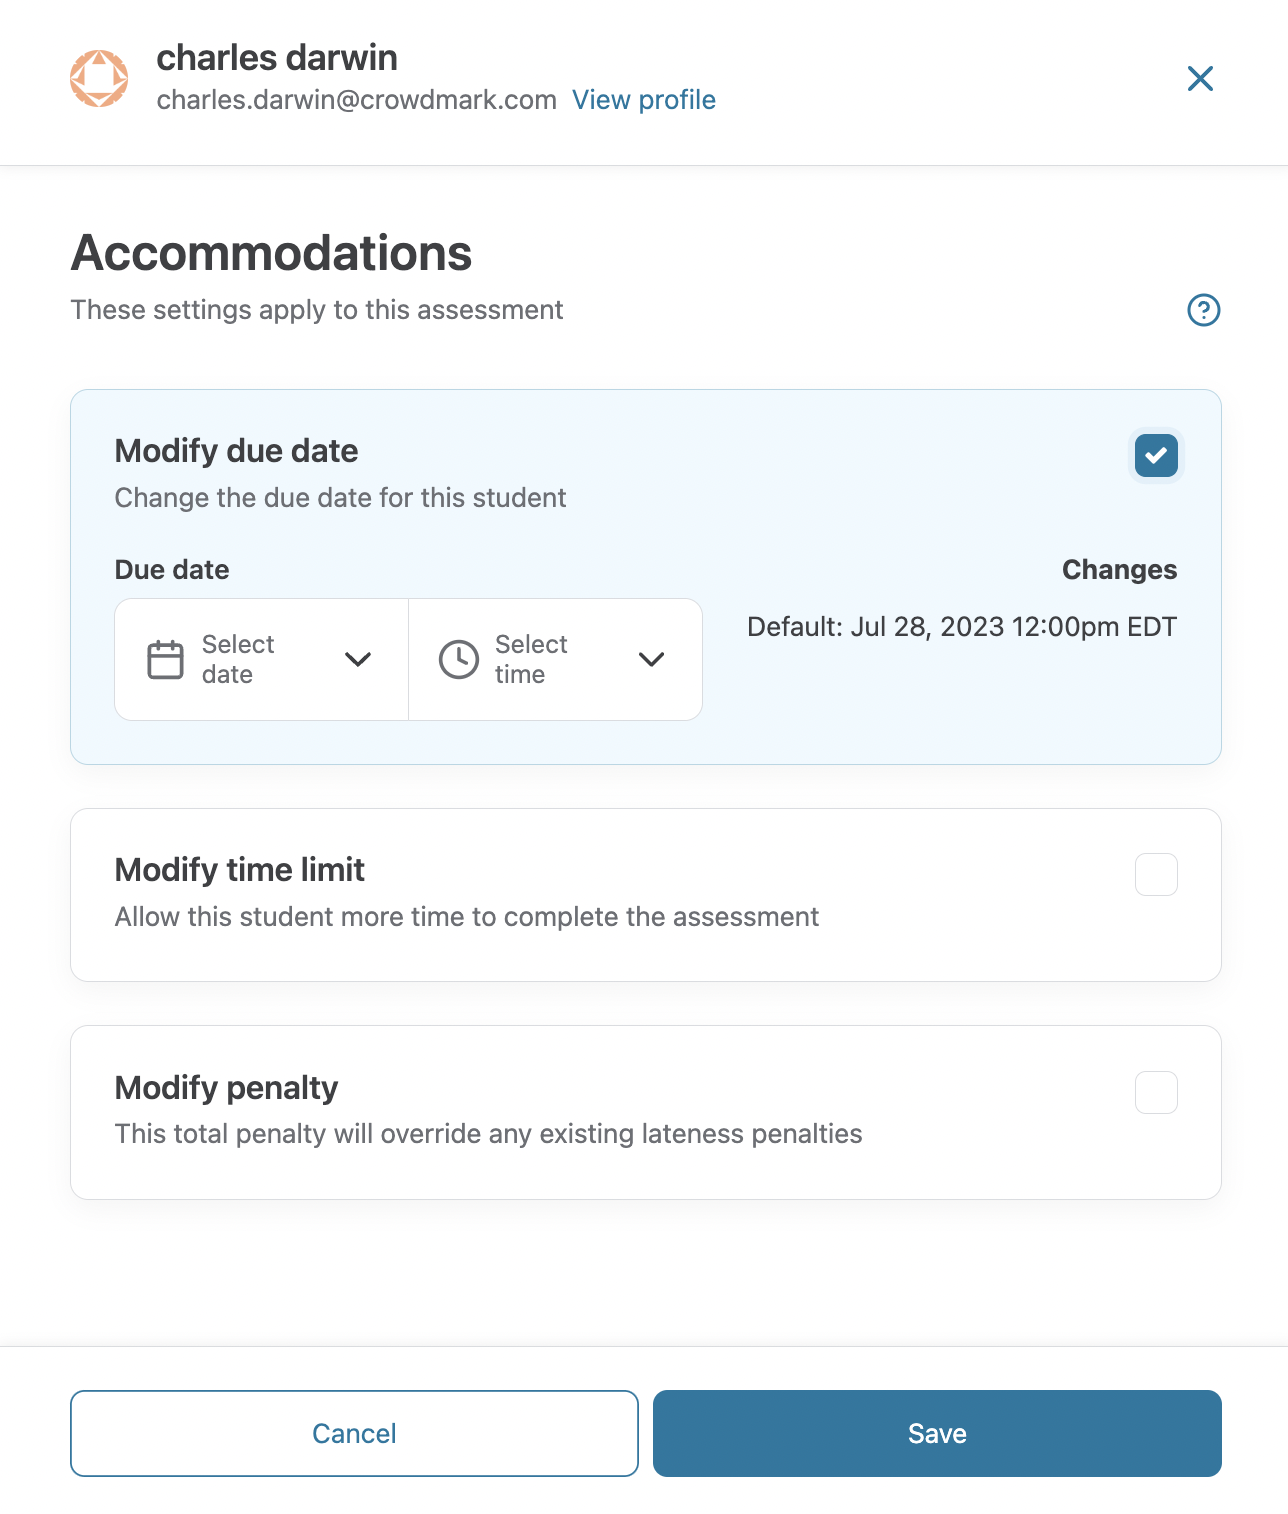 Accommodations panel open with modify due date selected.